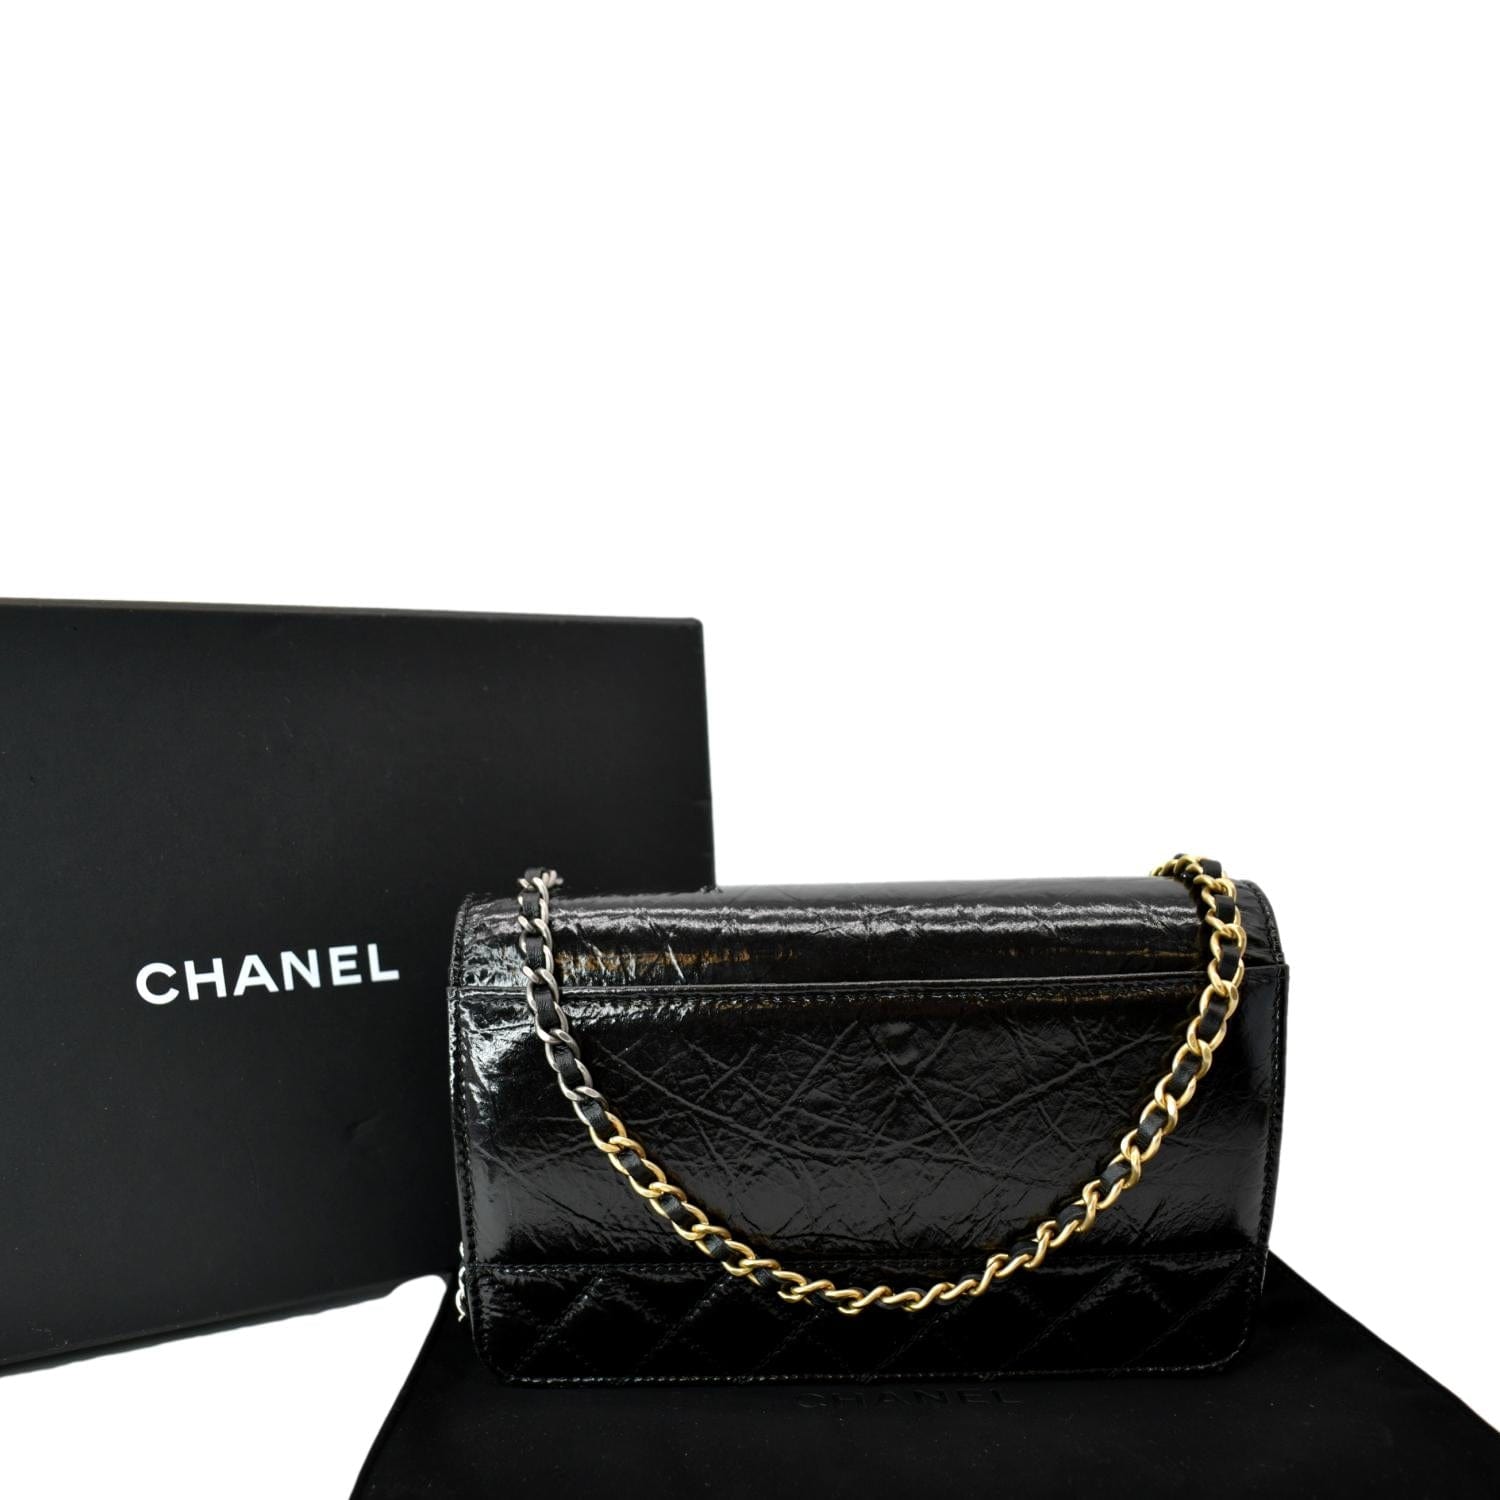 Authentic Chanel Black Quilted Calfskin Leather Wallet with Pearl Chai –  Paris Station Shop